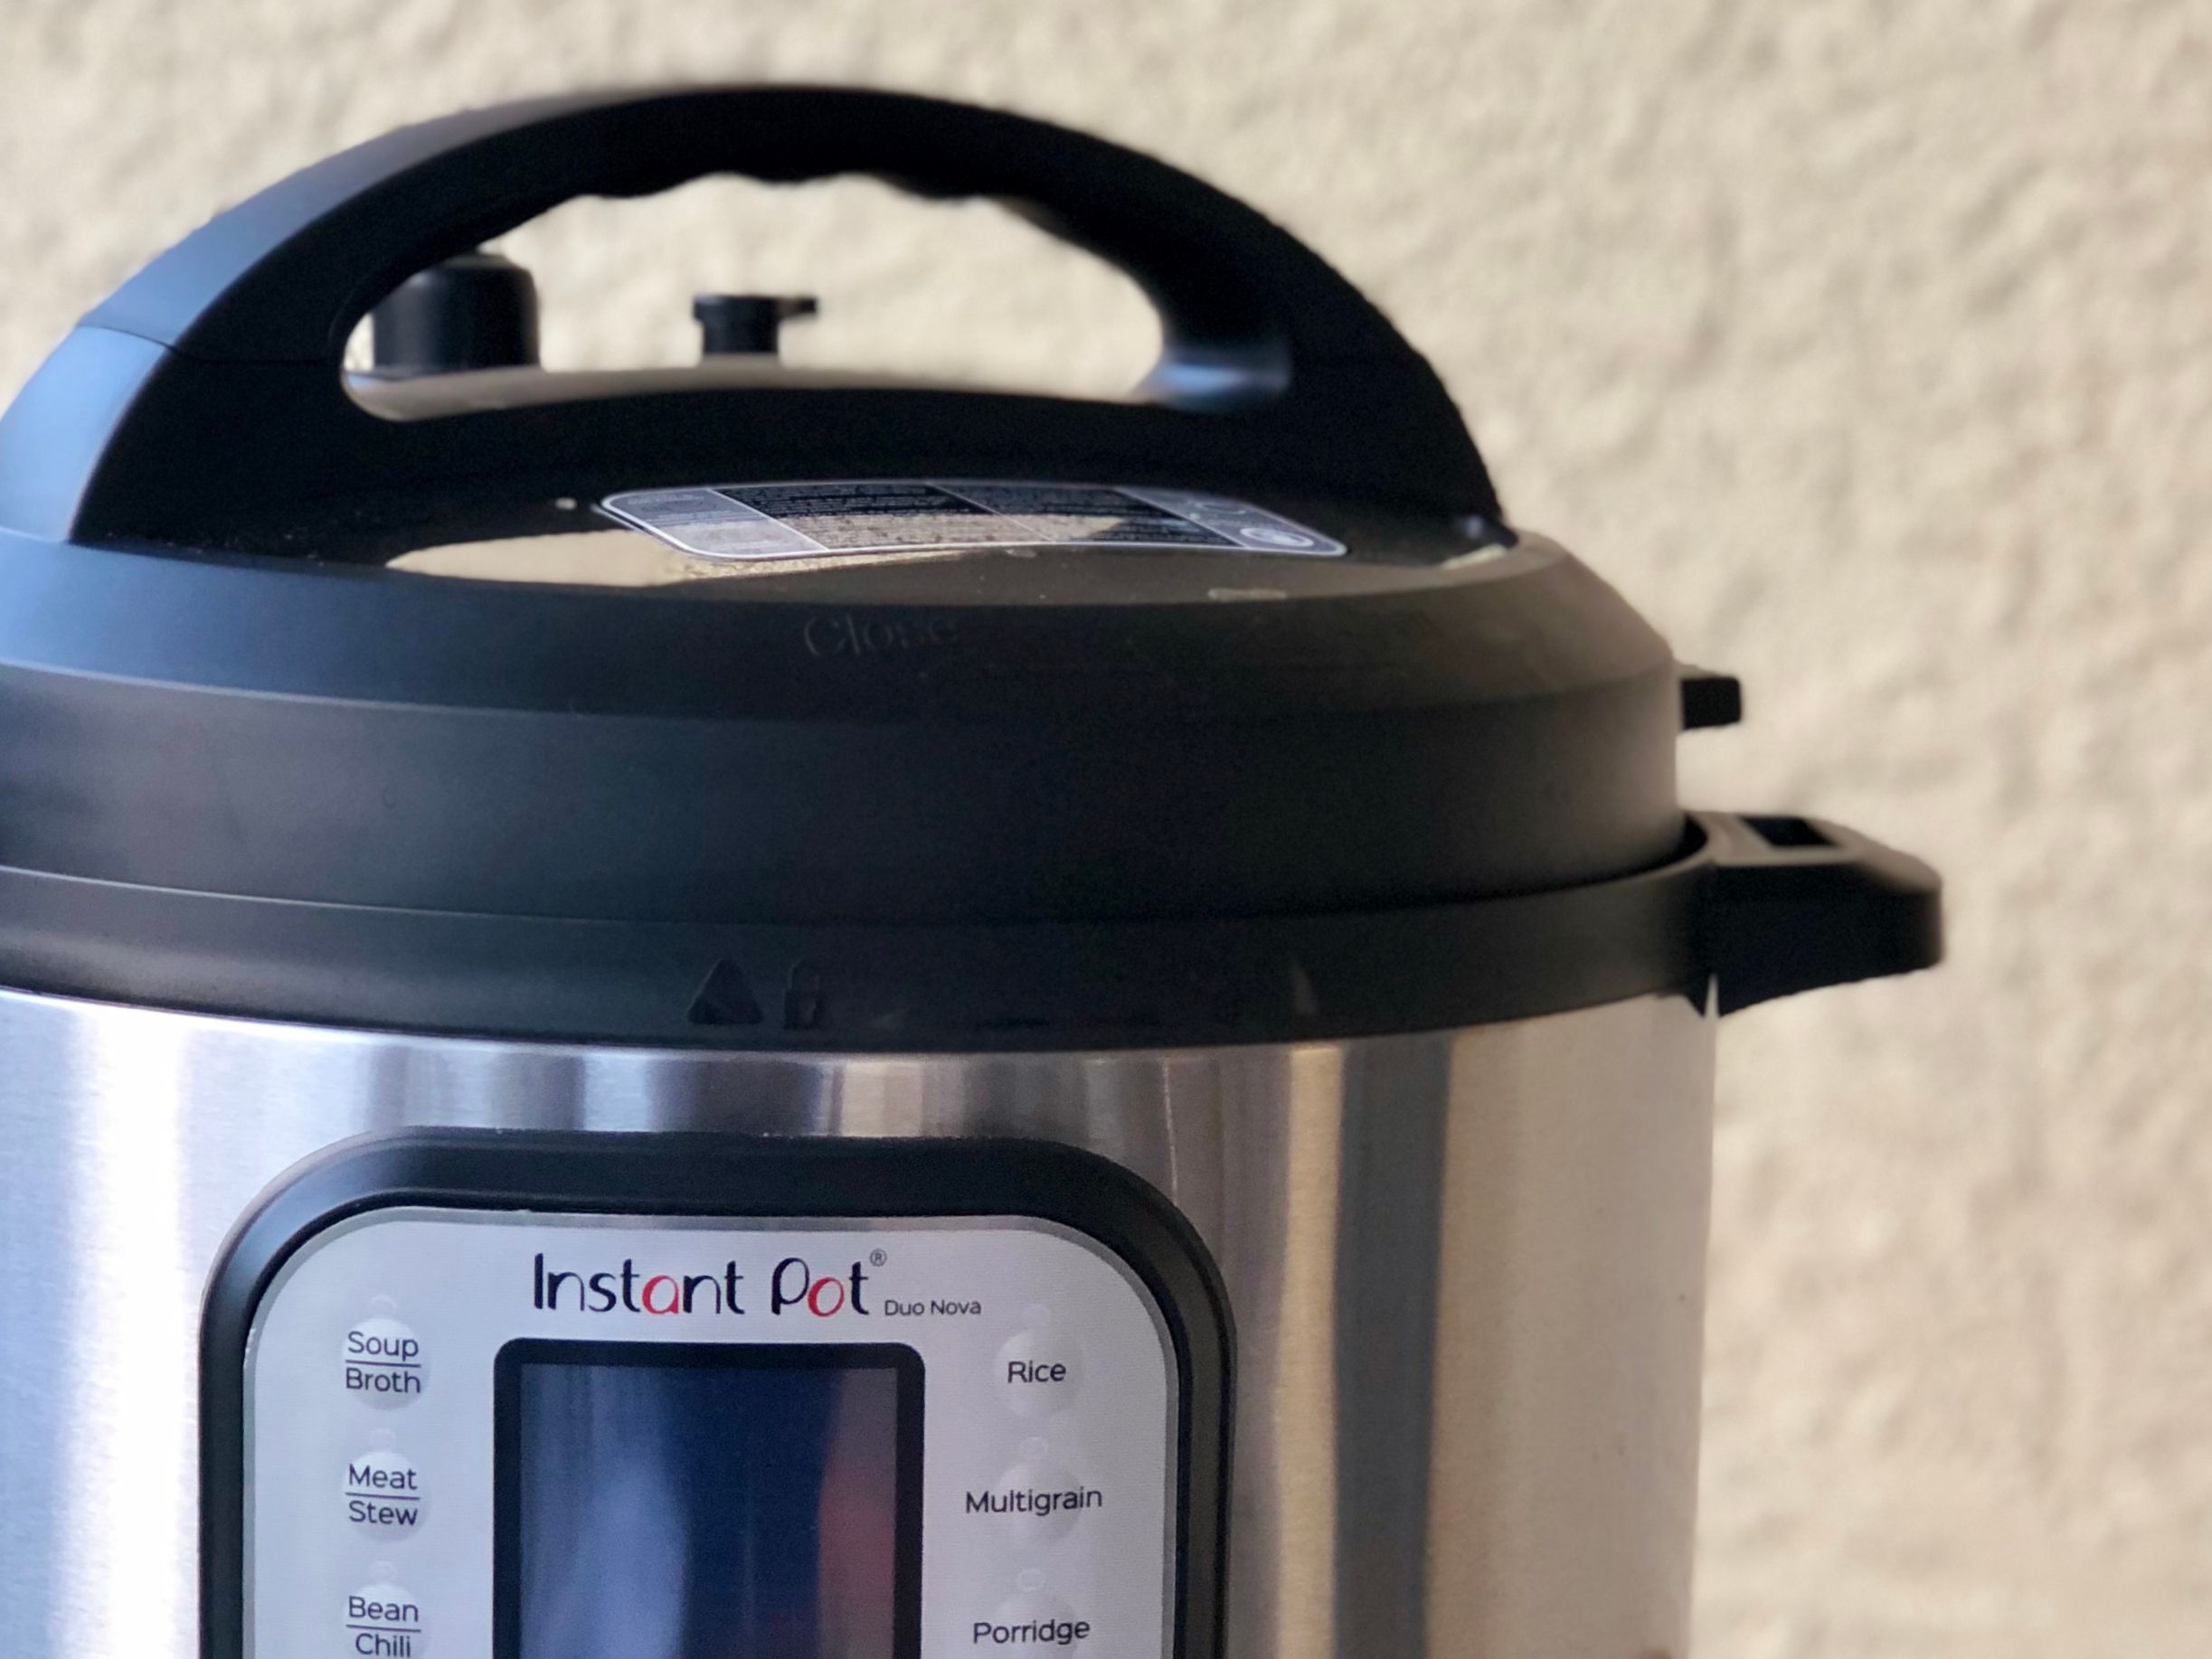 Getting Started with your Instant Pot Duo Nova 